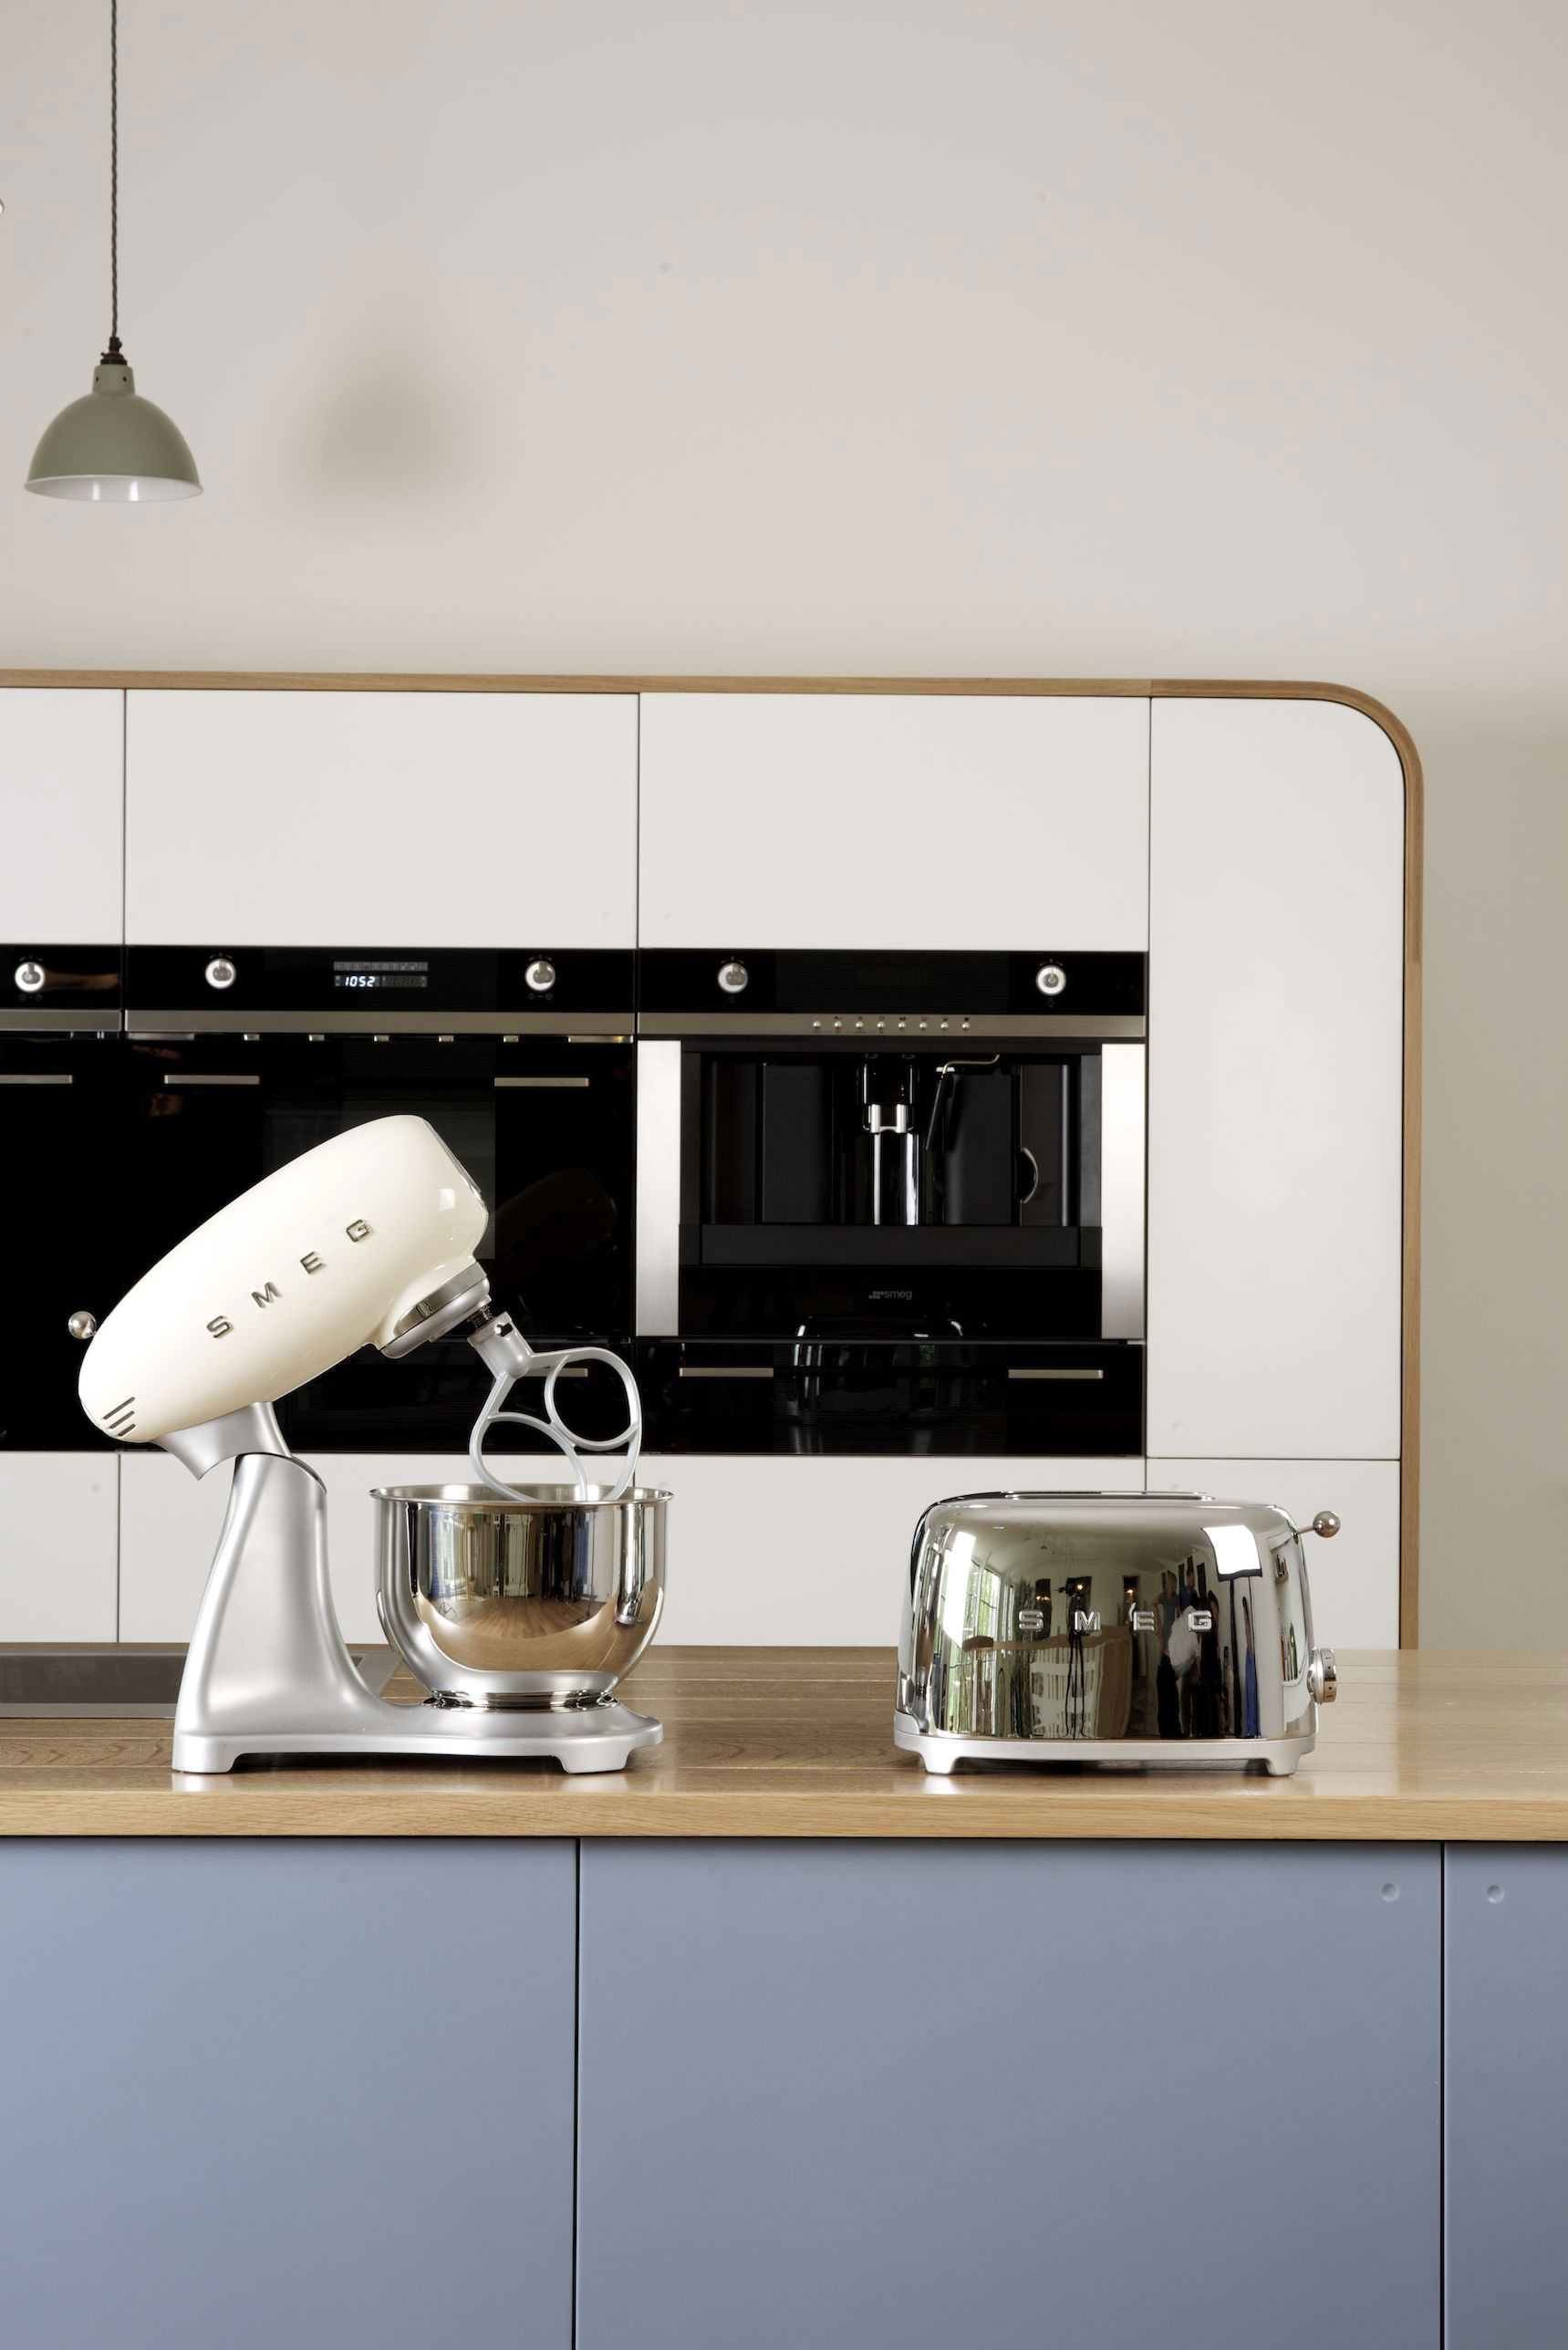 deVOL-kitchens-Cotes Mill-Air-Smeg-accessories-retro-bright colours-small-appliances-toaster-mixer-hanging light-cookers